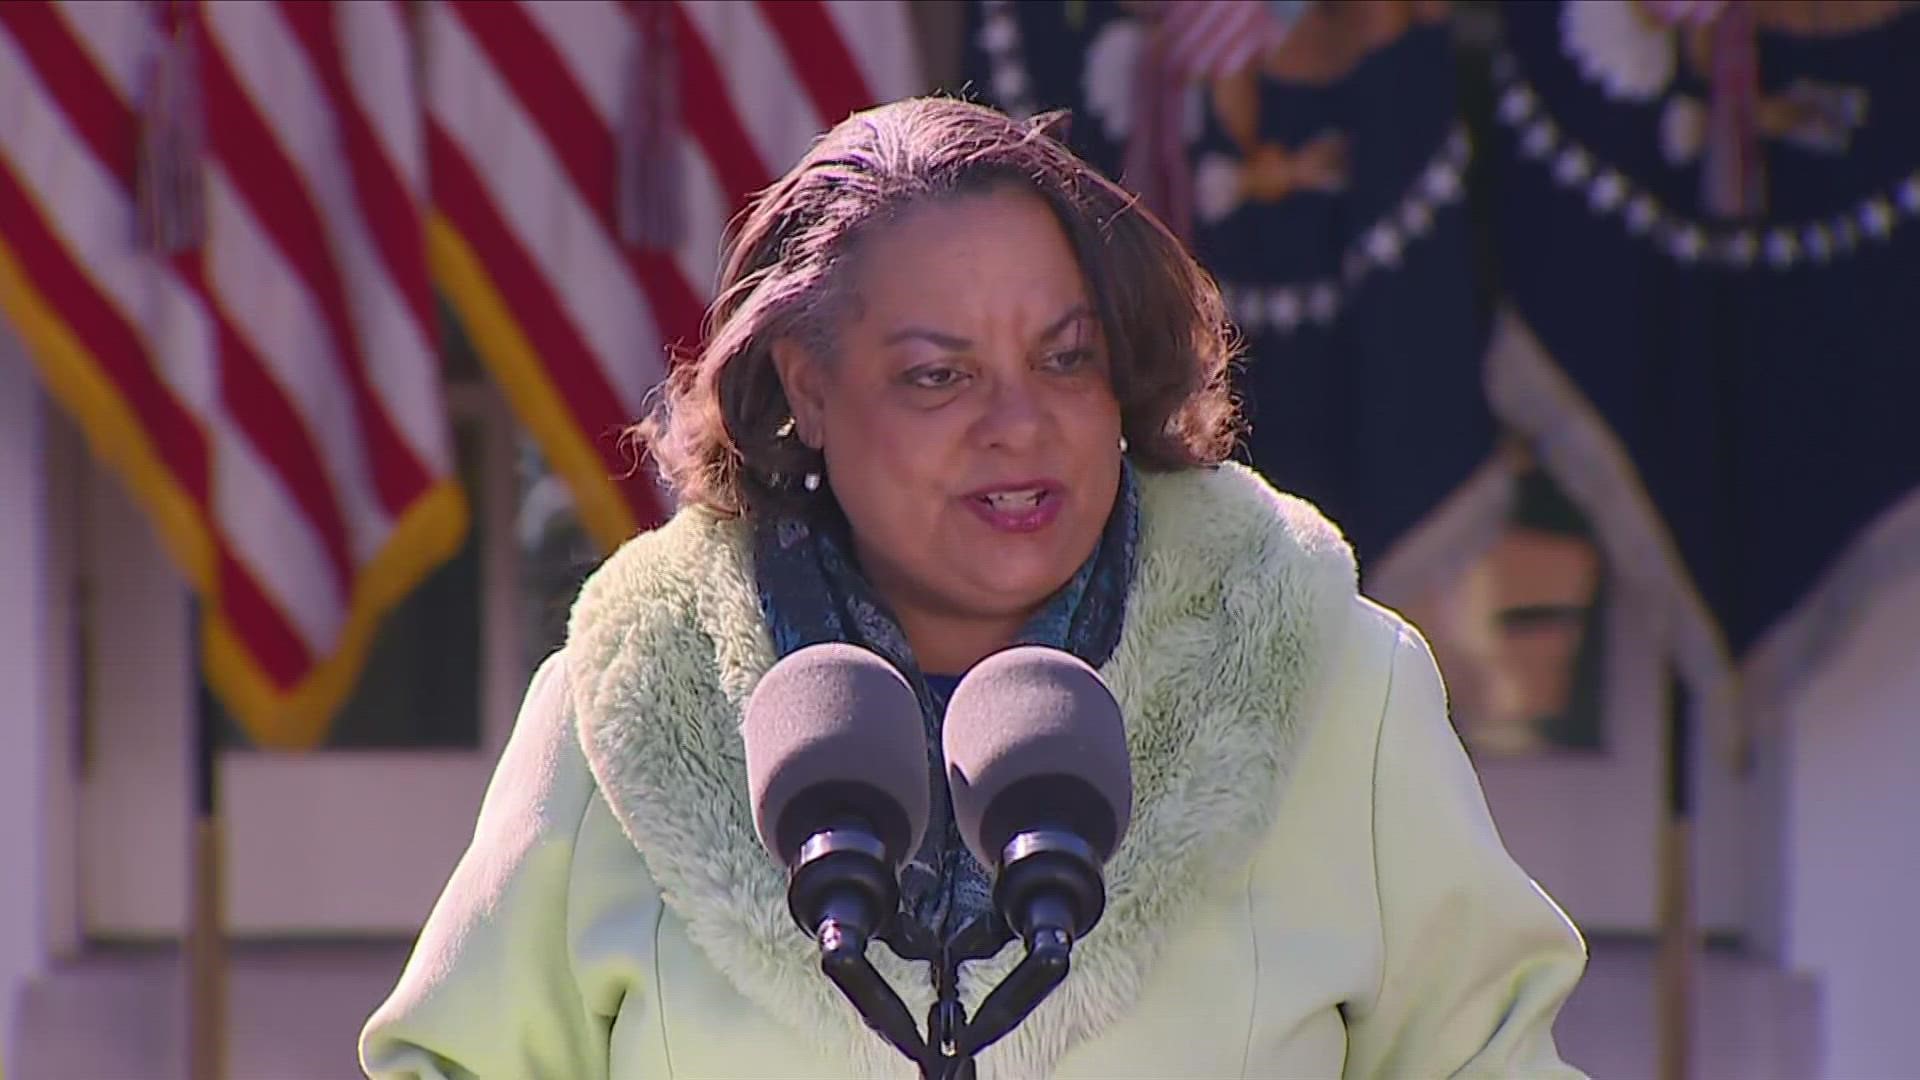 Michelle Duster spoke after Biden signed an anti-lynching bill named after Emmett Till,  the Black teenager whose brutal 1955 killing became a pivotal moment.